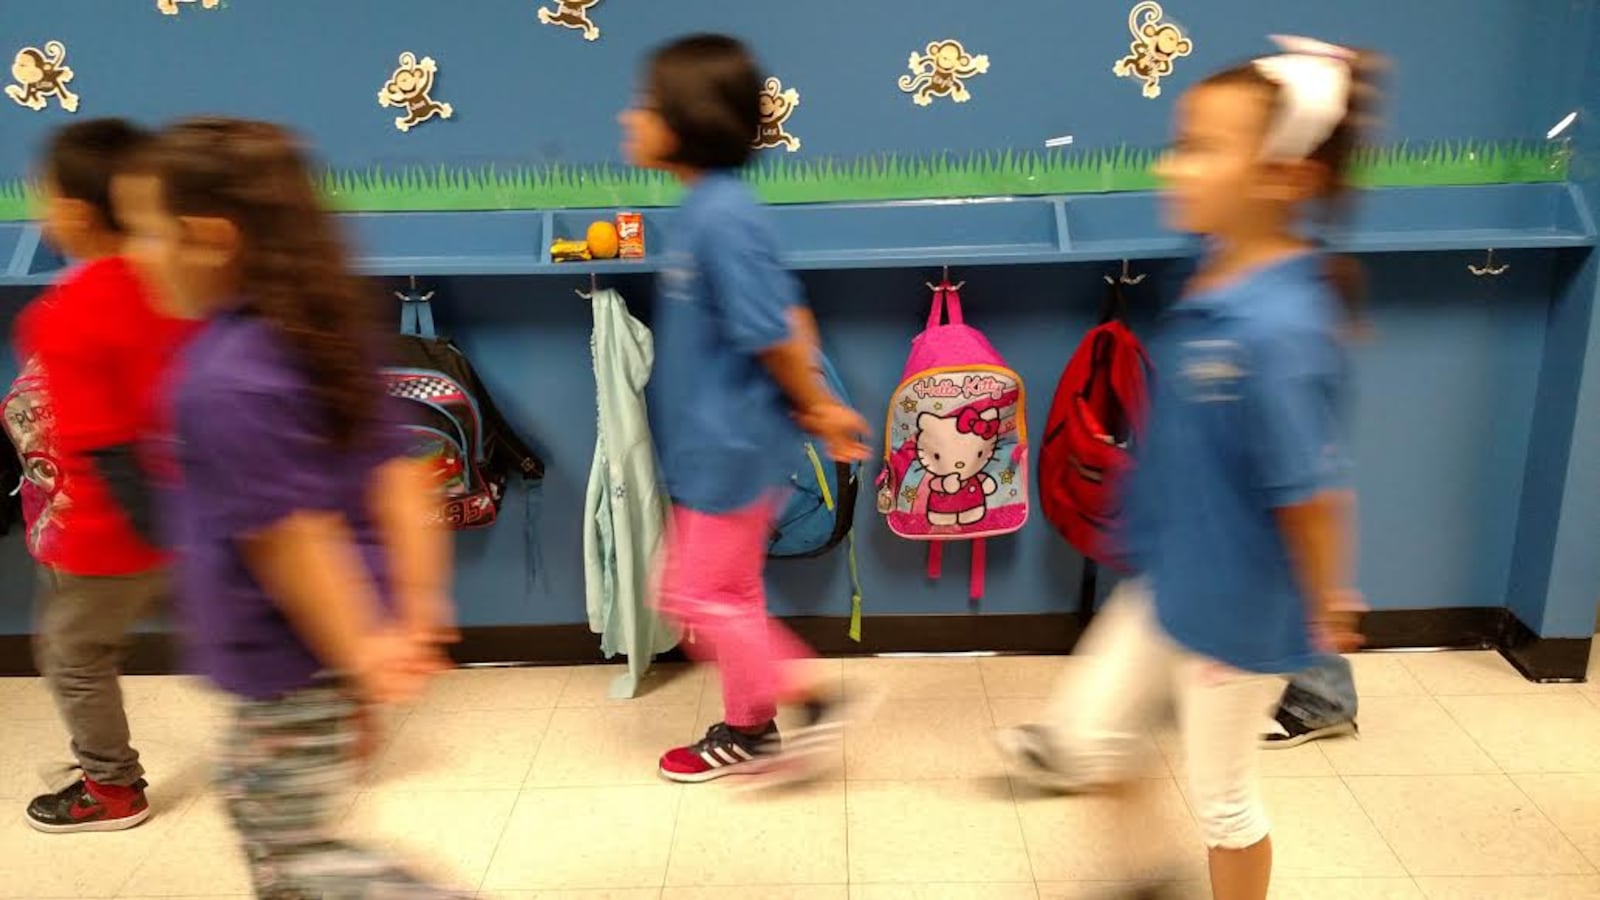 In place of tall olive green lockers at Trevista at Horace Mann: hooks and shelves that 4-year-olds can reach.